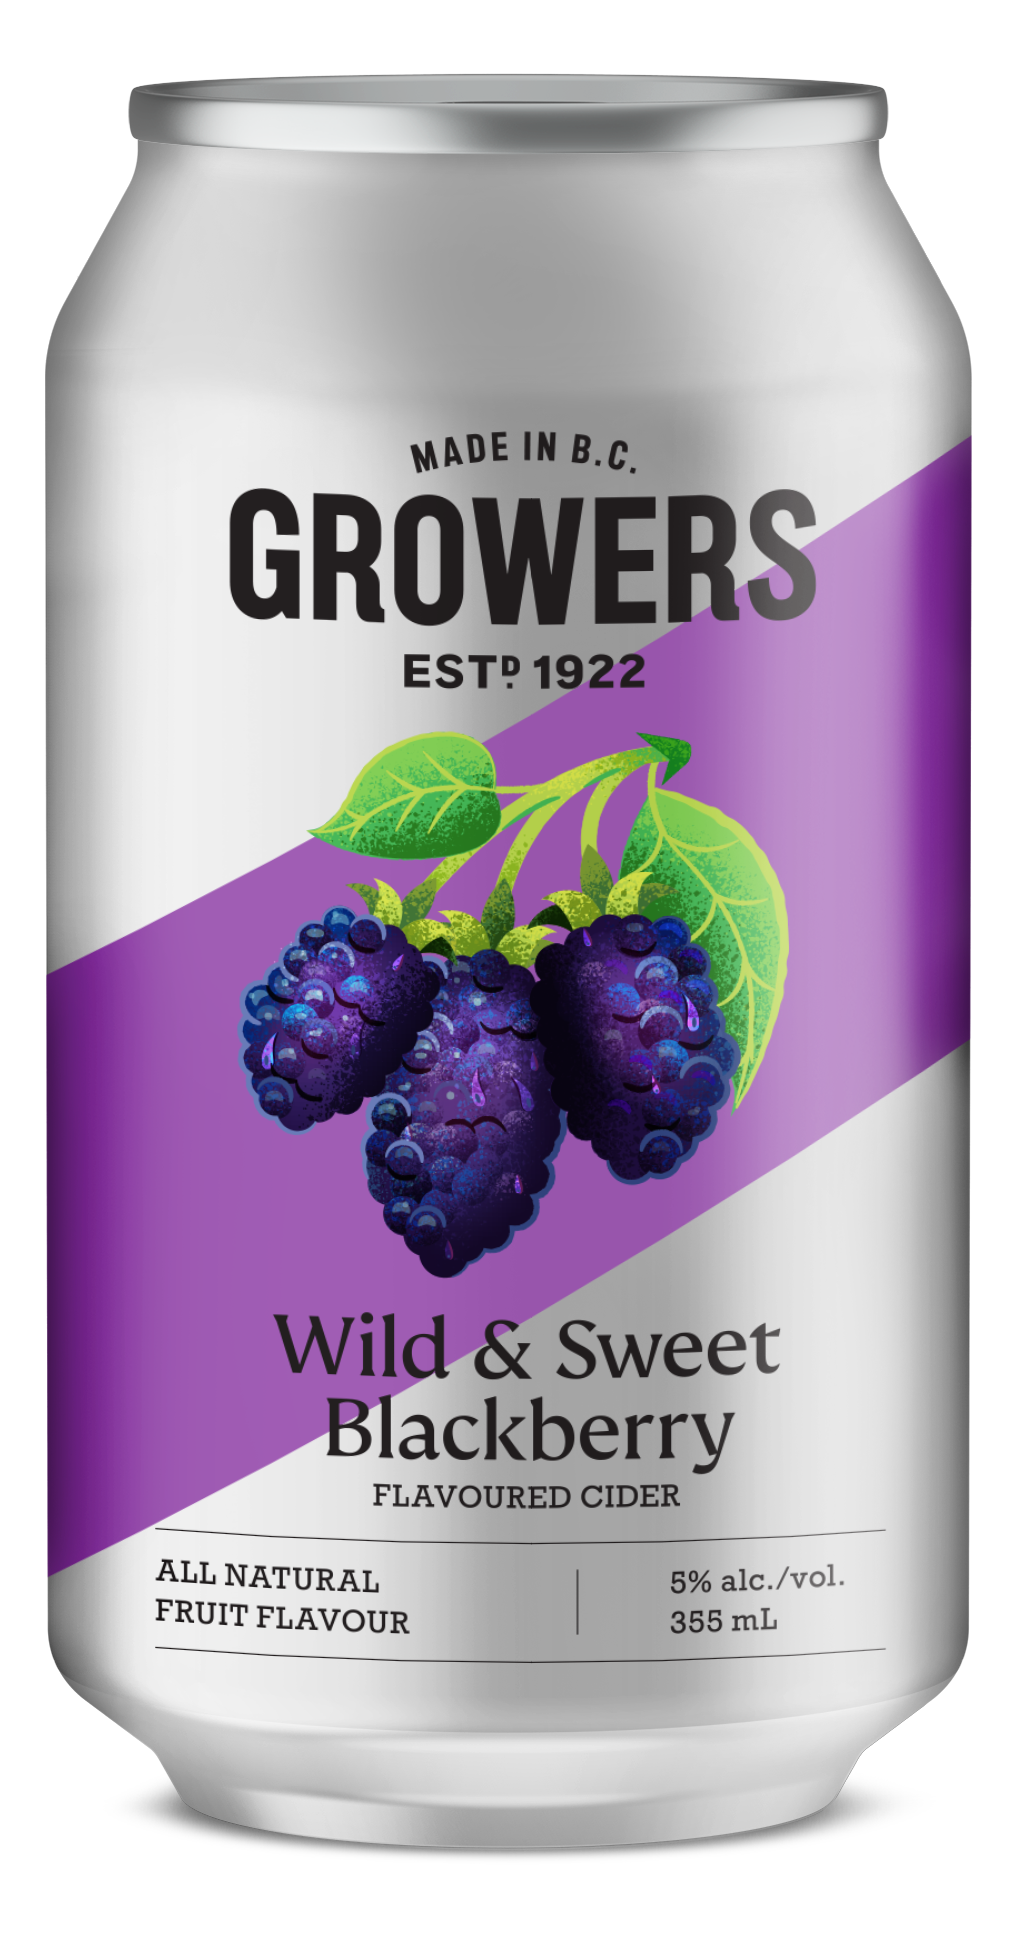 Can of Growers Wild & Sweet Blackberry cider